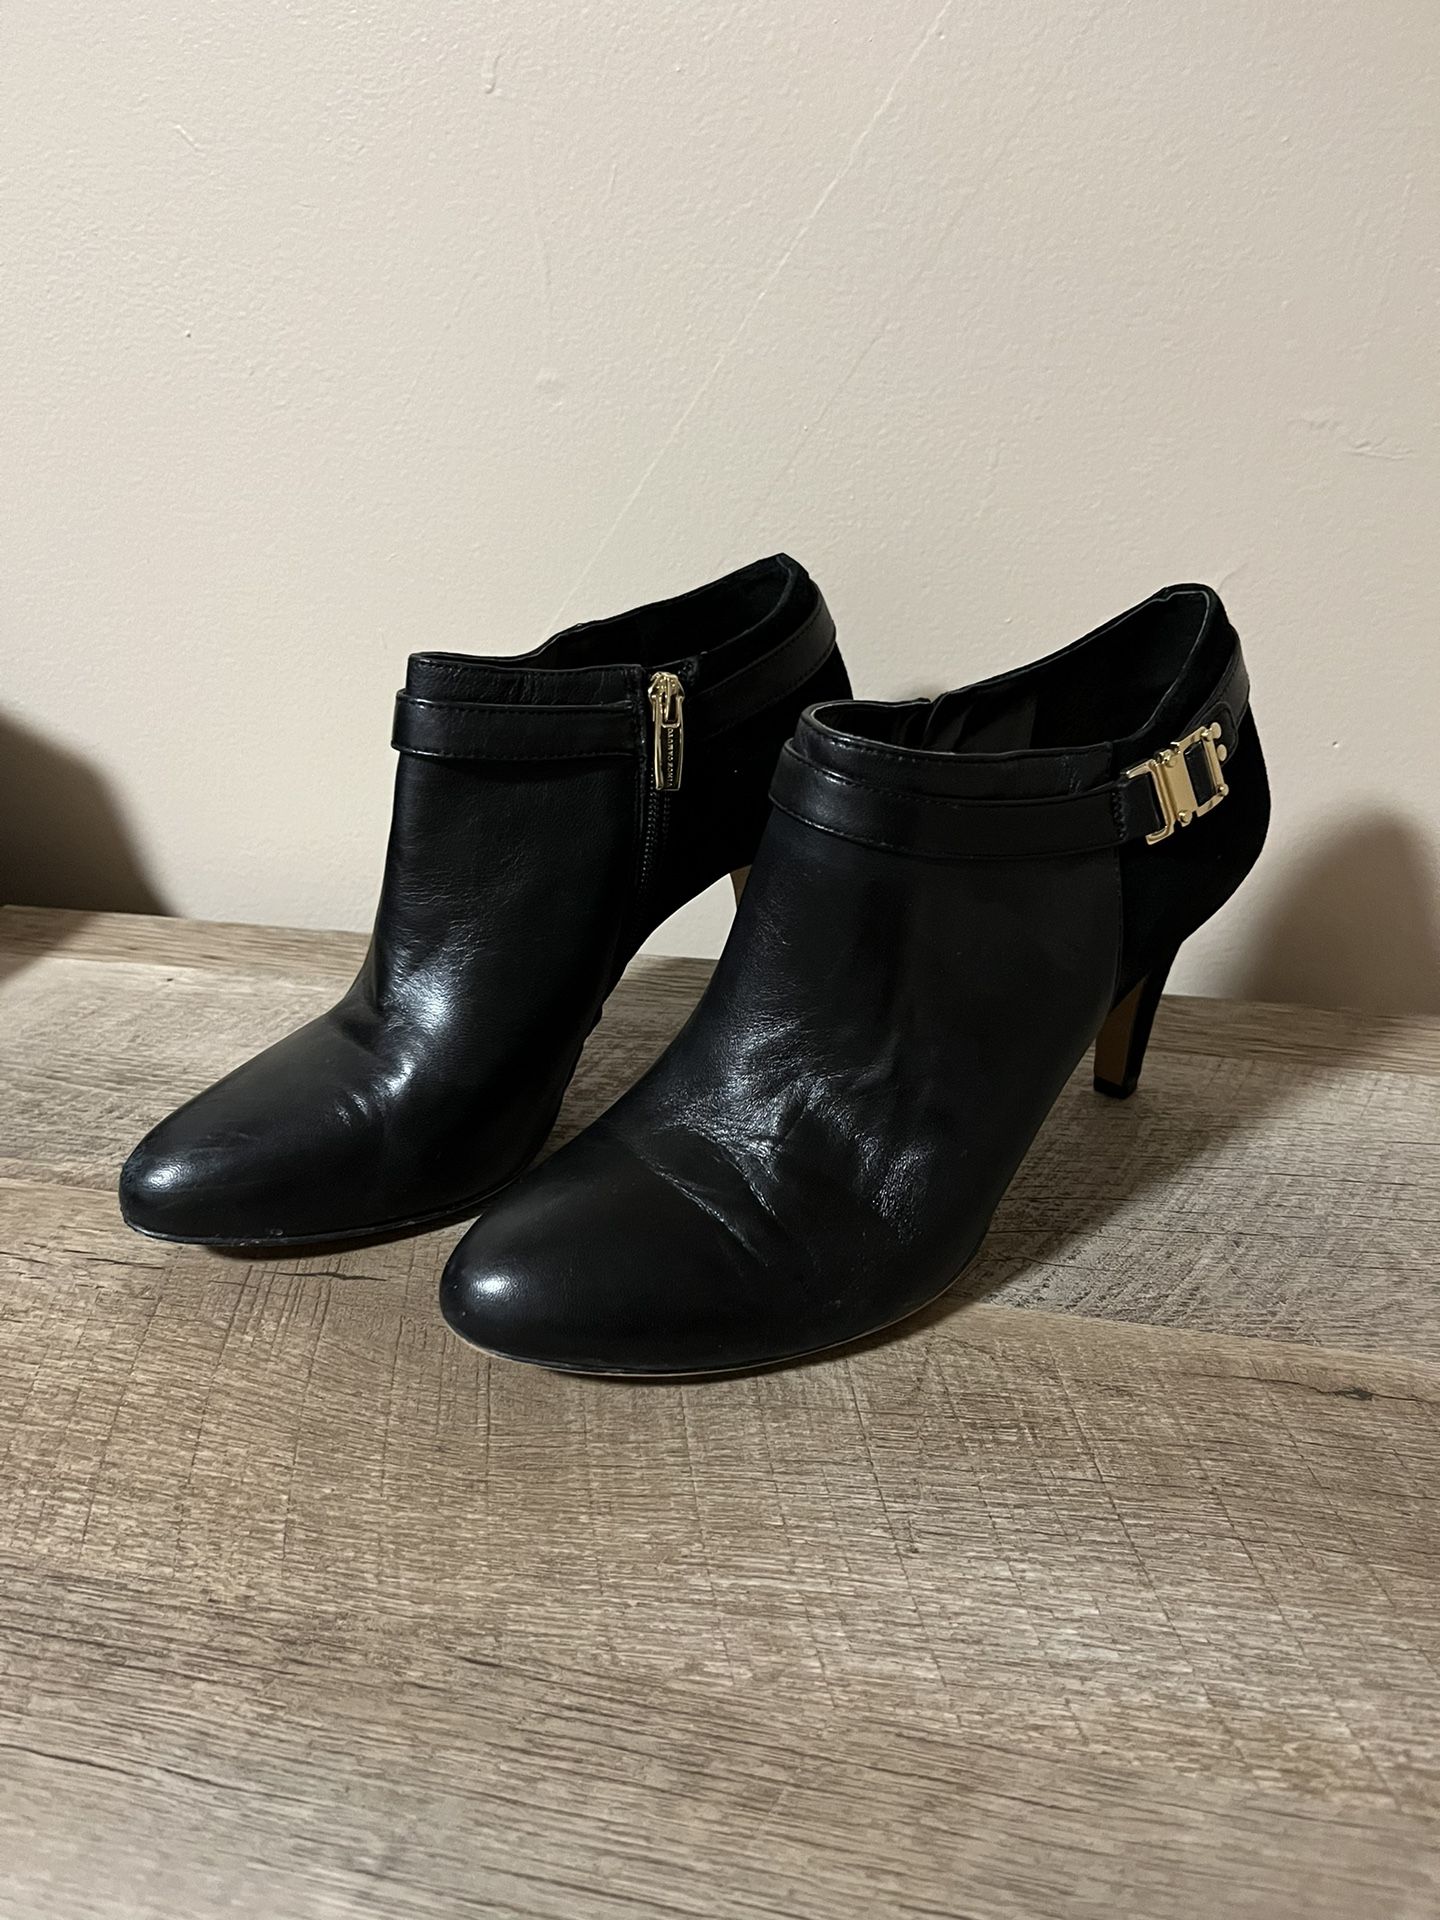 Women’s Vince Camuto Boots